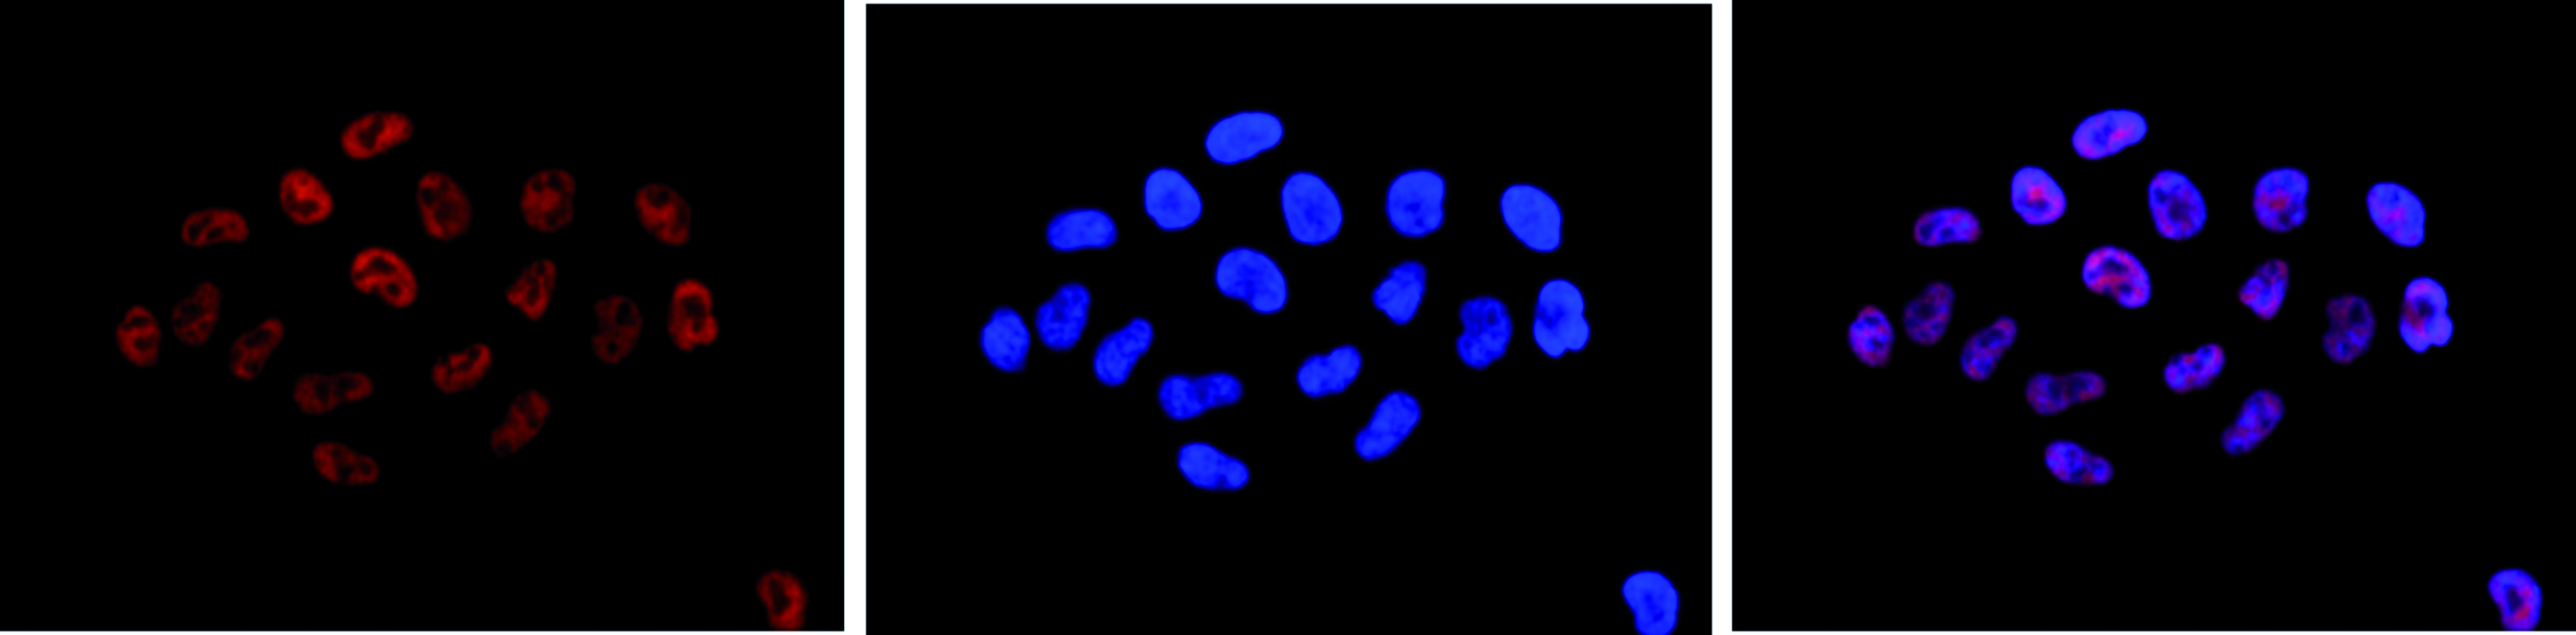 HeLa cells were stained with H3K4me3 (2G10) Monoclonal Antibody (Cat. No. bsm-53015M) and with DAPI. Cells were fixed with 4% formaldehyde for 10’ and blocked with PBS/TX-100 containing 5% normal goat serum and 1% BSA. The cells were labelled with the H3K4me3 antibody (left) diluted 1:500 in blocking solution followed by an anti-mouse antibody conjugated to Alexa594. The middle panel shows staining of the nuclei with DAPI. A merge of the two staining is shown on the right.